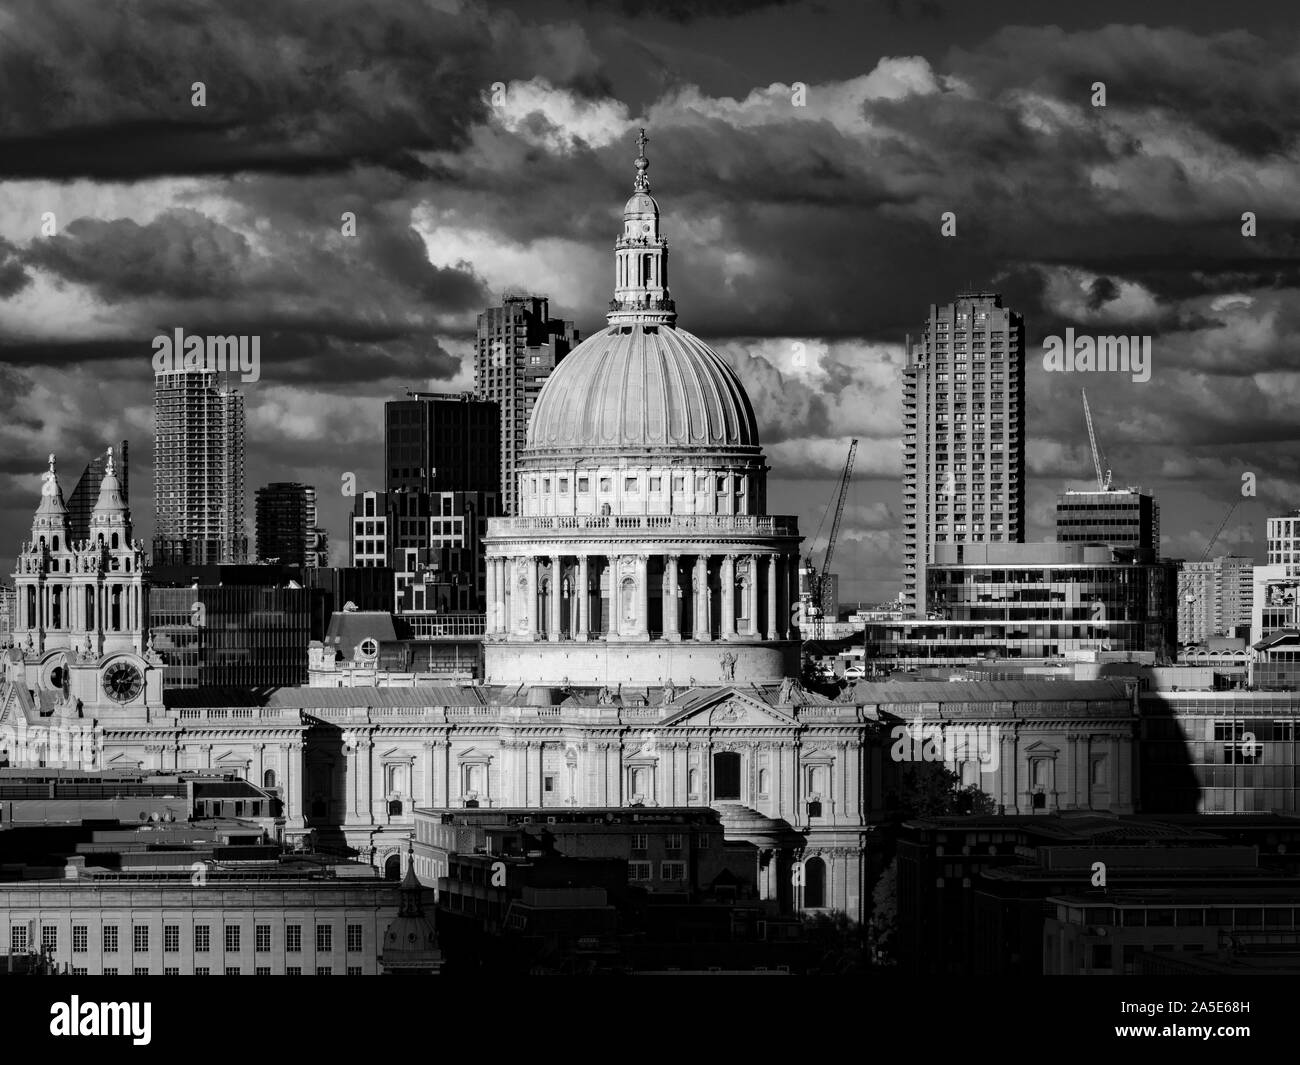 St Paul's Cathedral, London, UK. Stock Photo